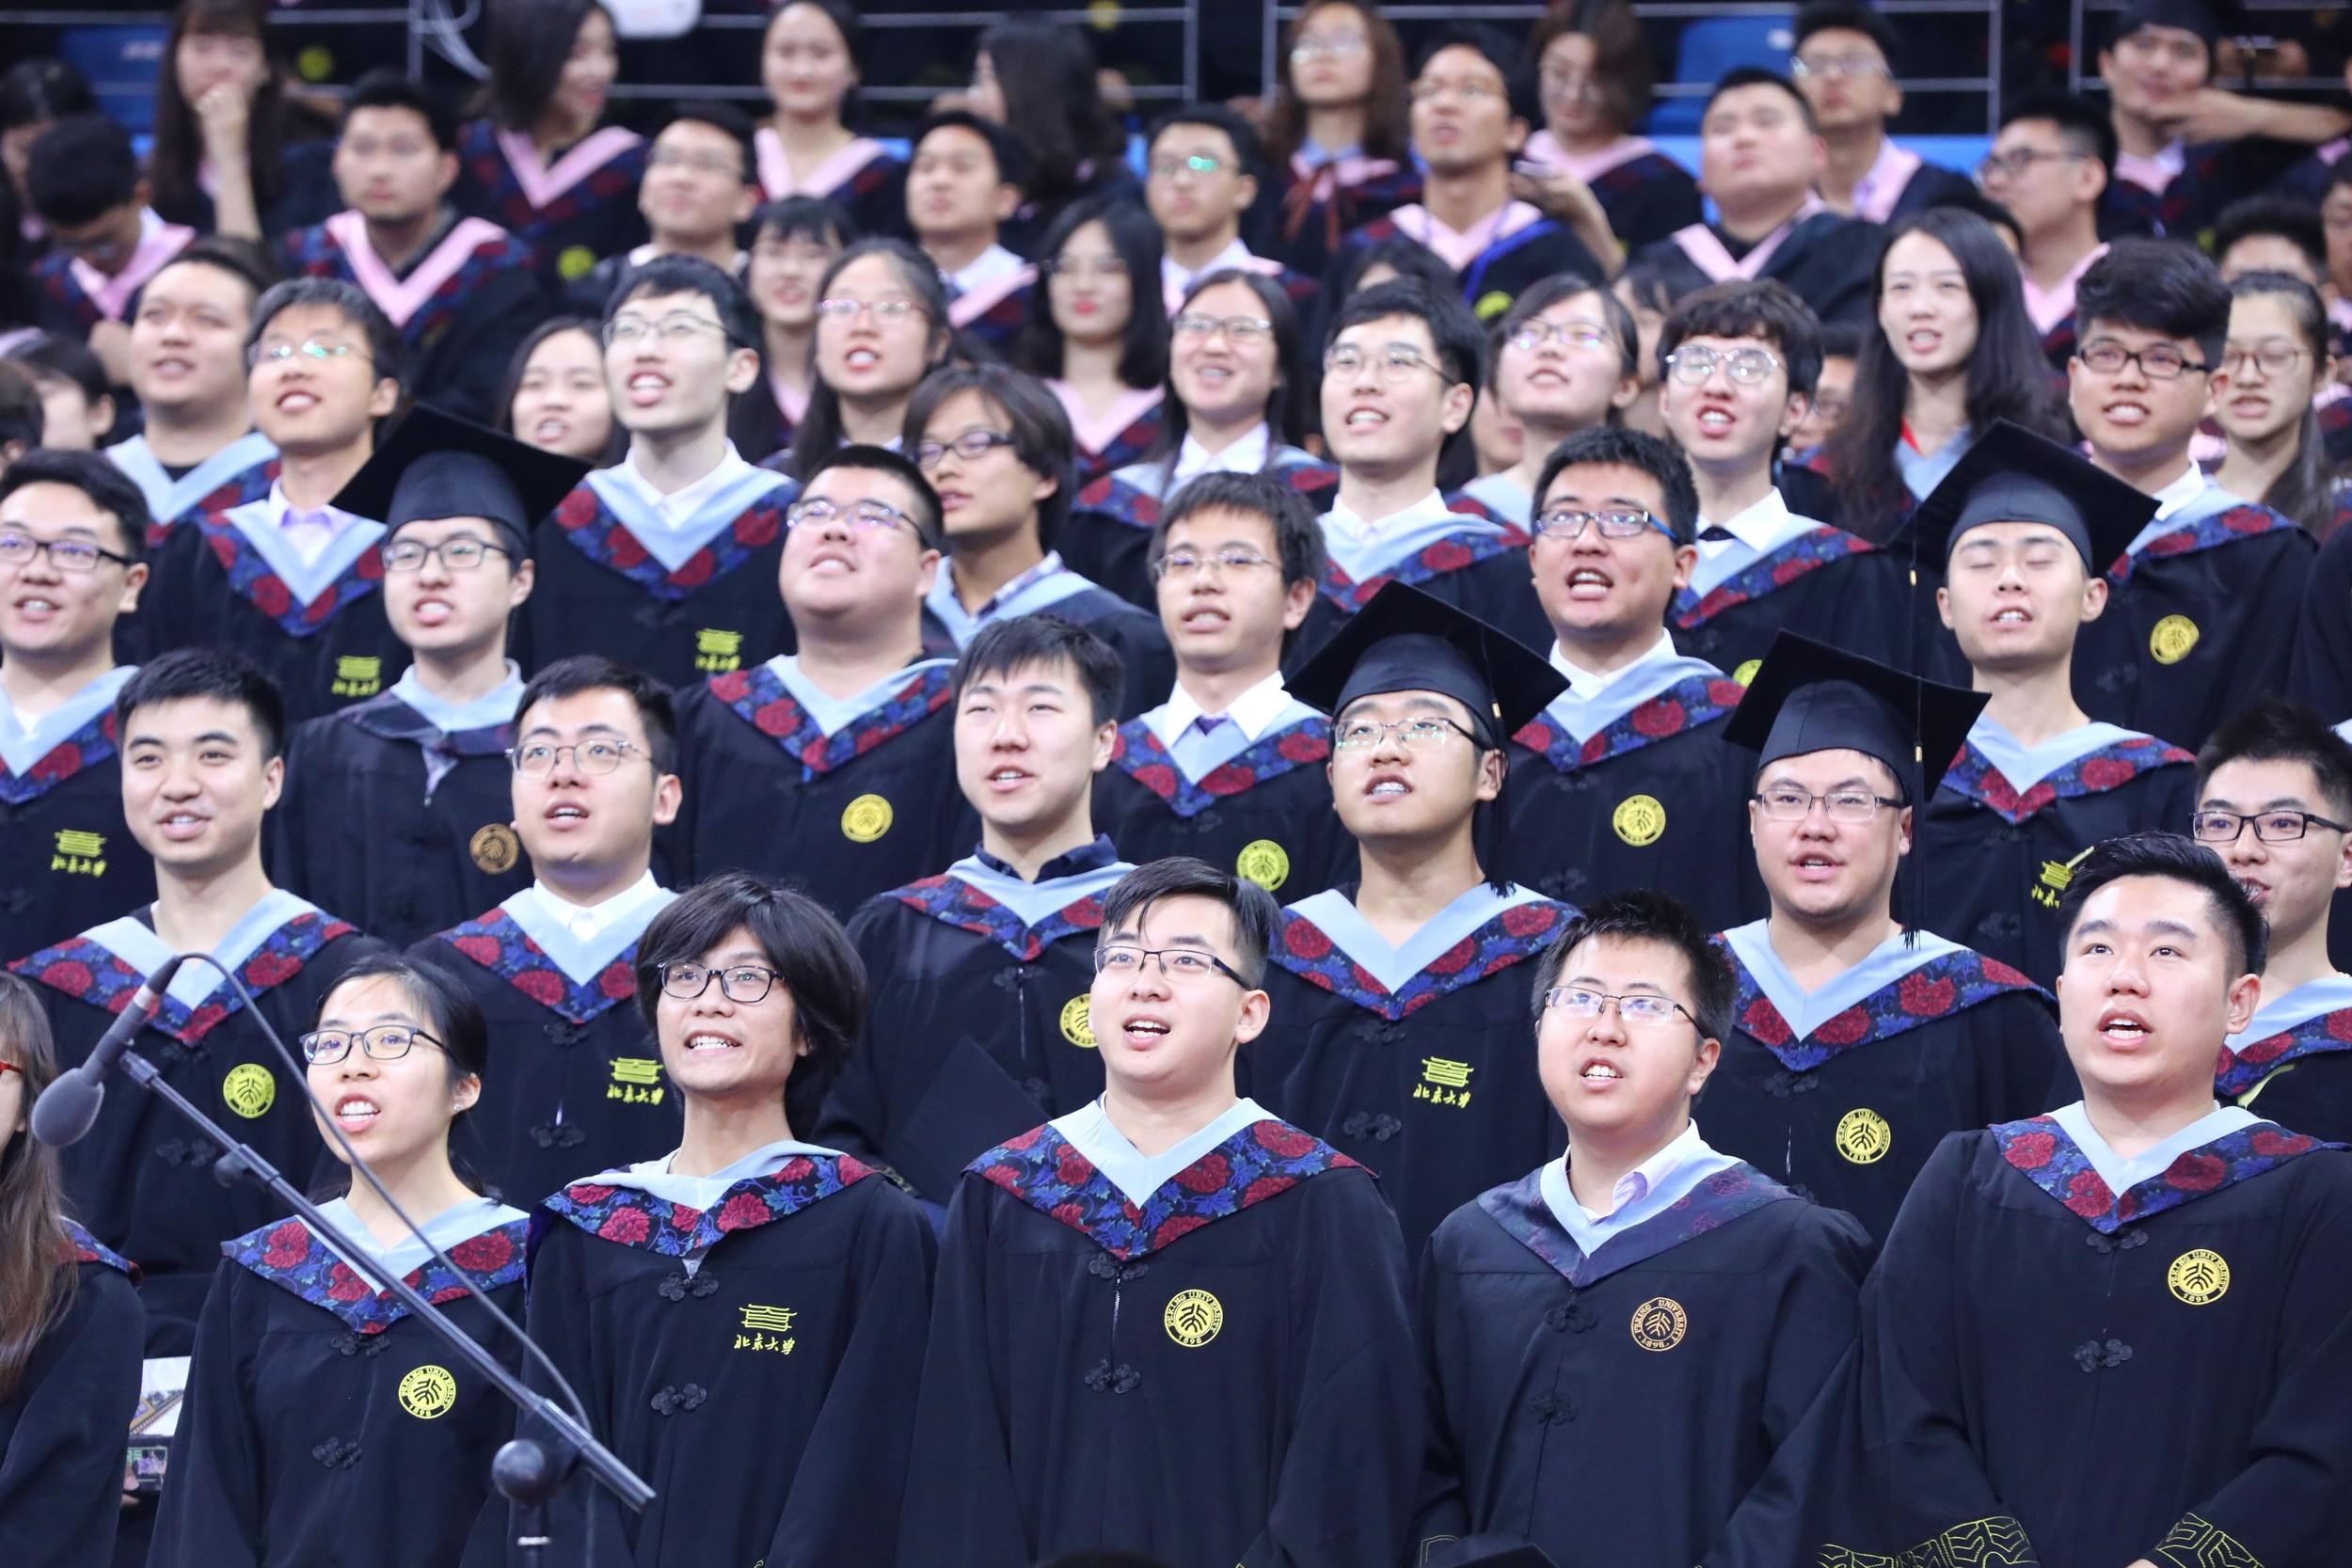 Graduates attend the commencement ceremony at Peking University in Beijing, China, on July 10, 2018. The university recently expelled actor Zhai Tianlin from its PhD programme. Photo: Xinhua